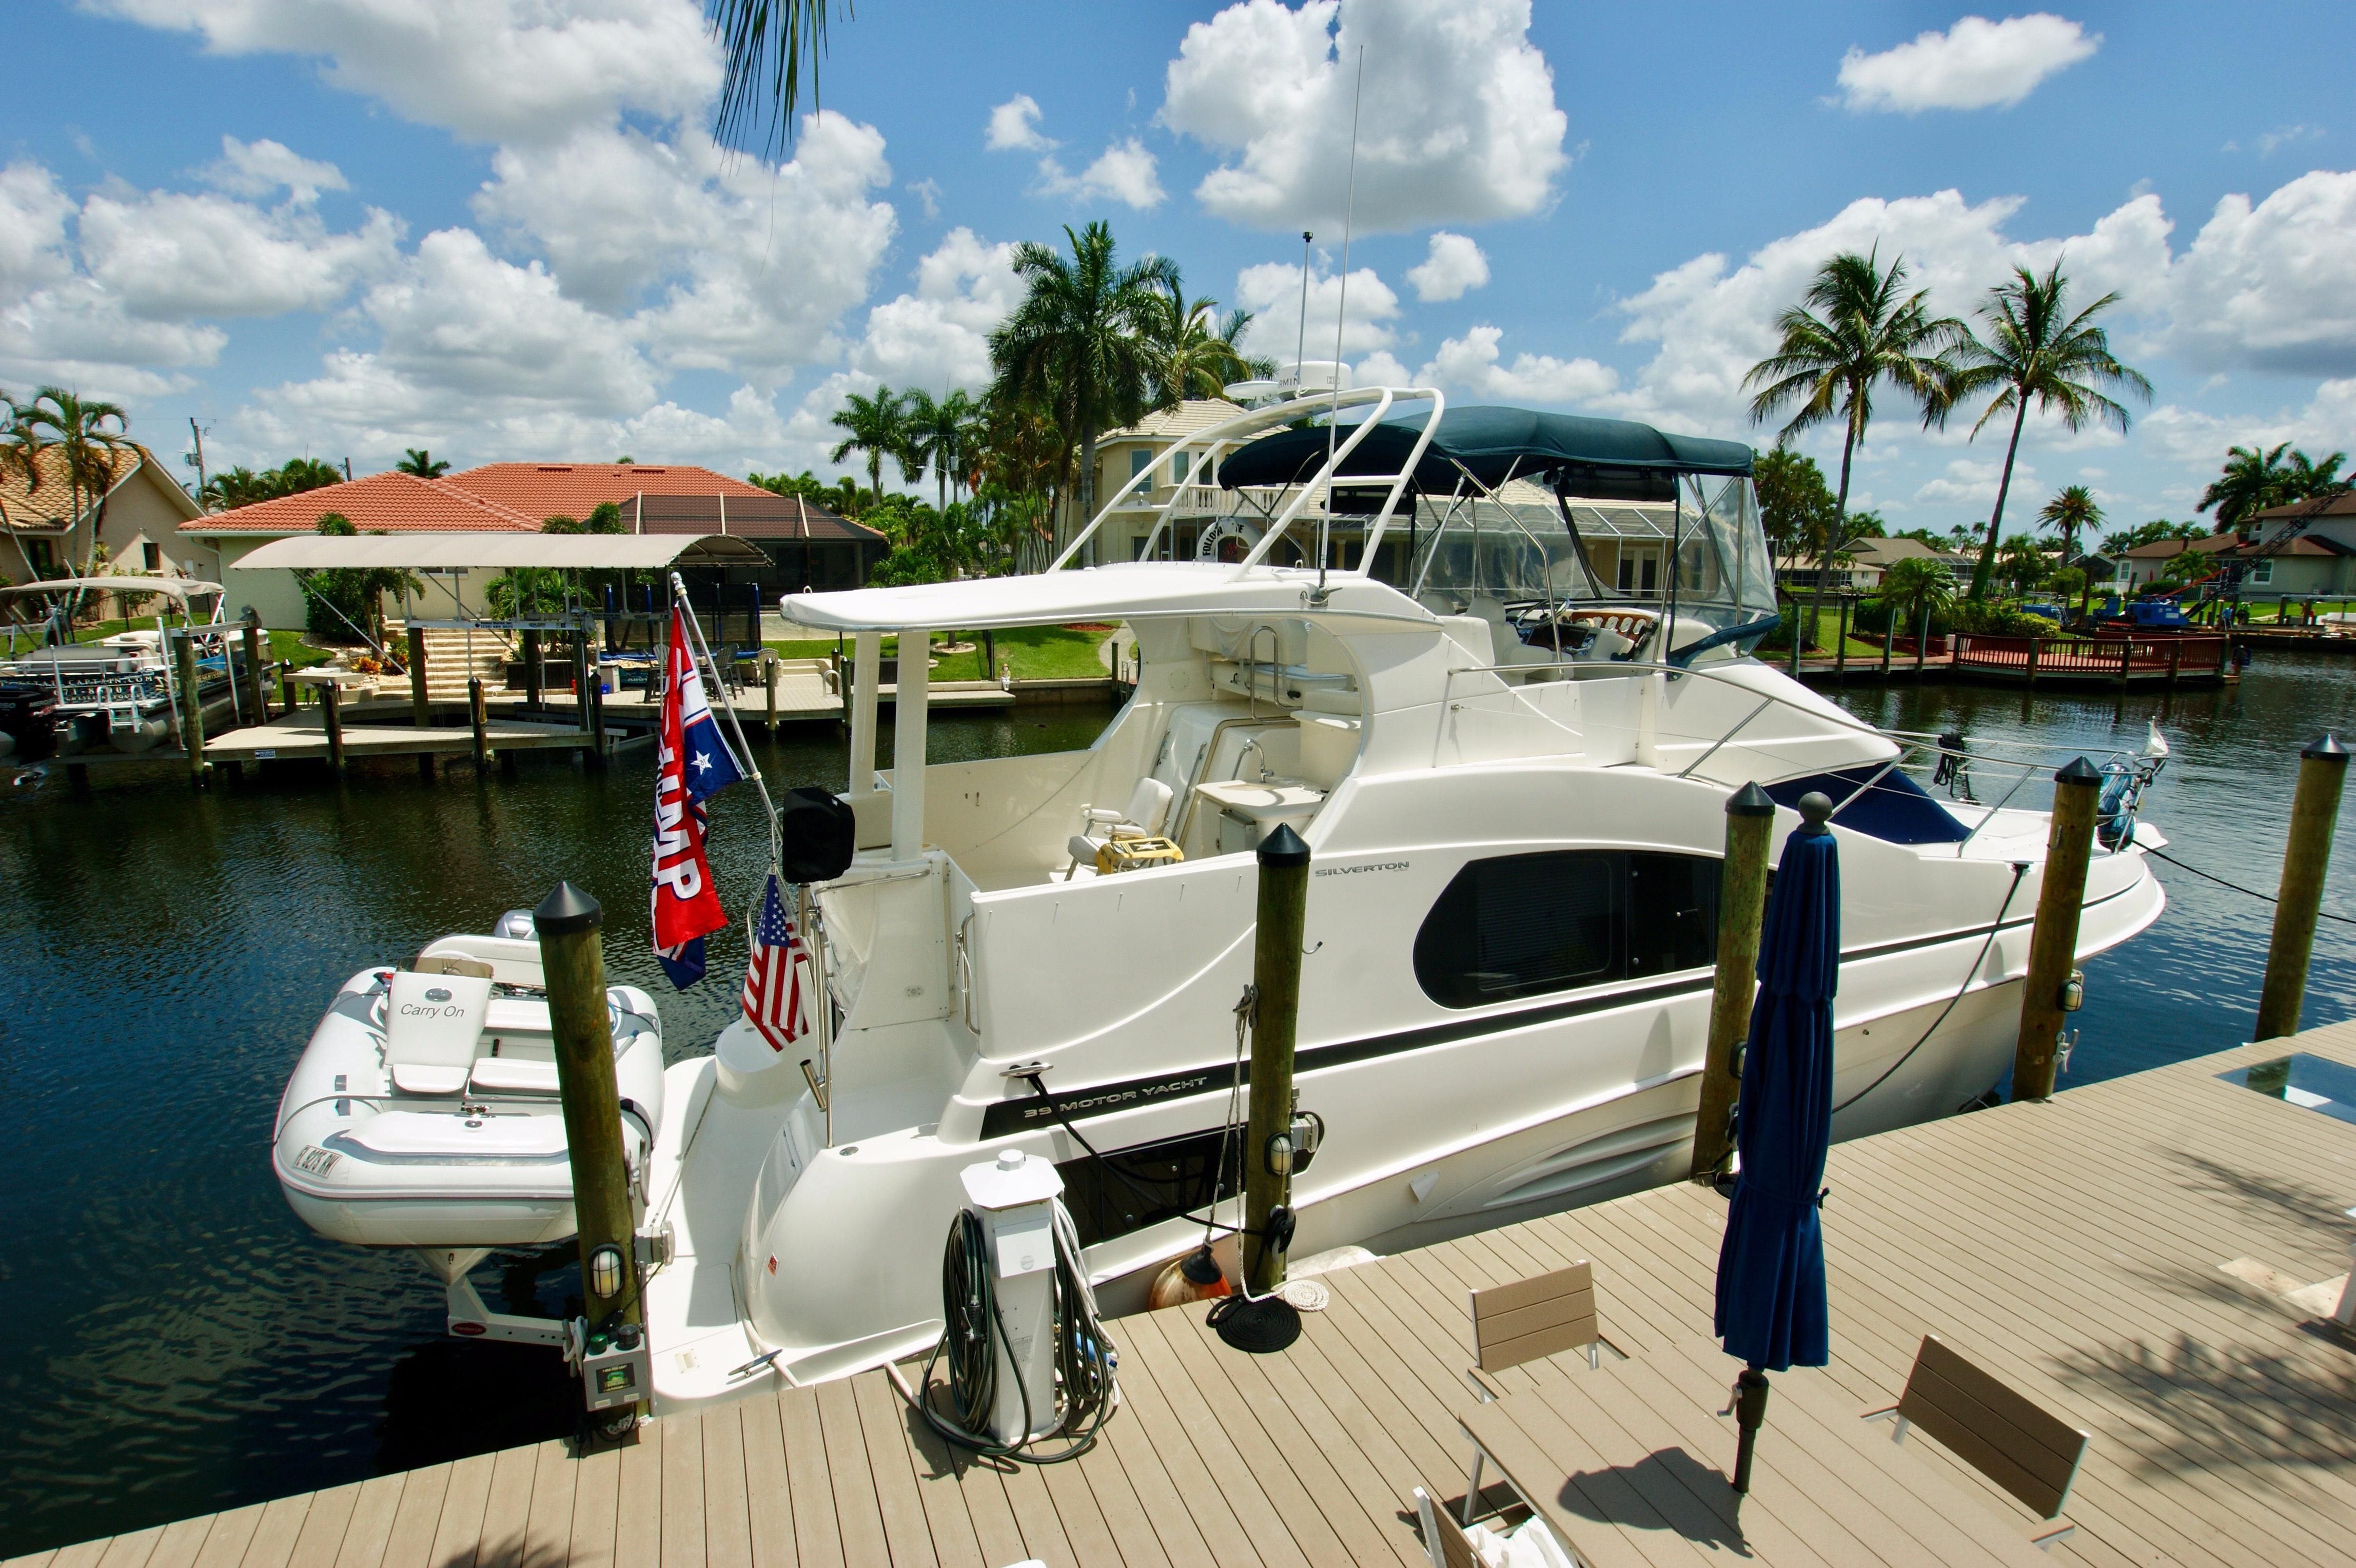 39 ft cruiser yacht for sale